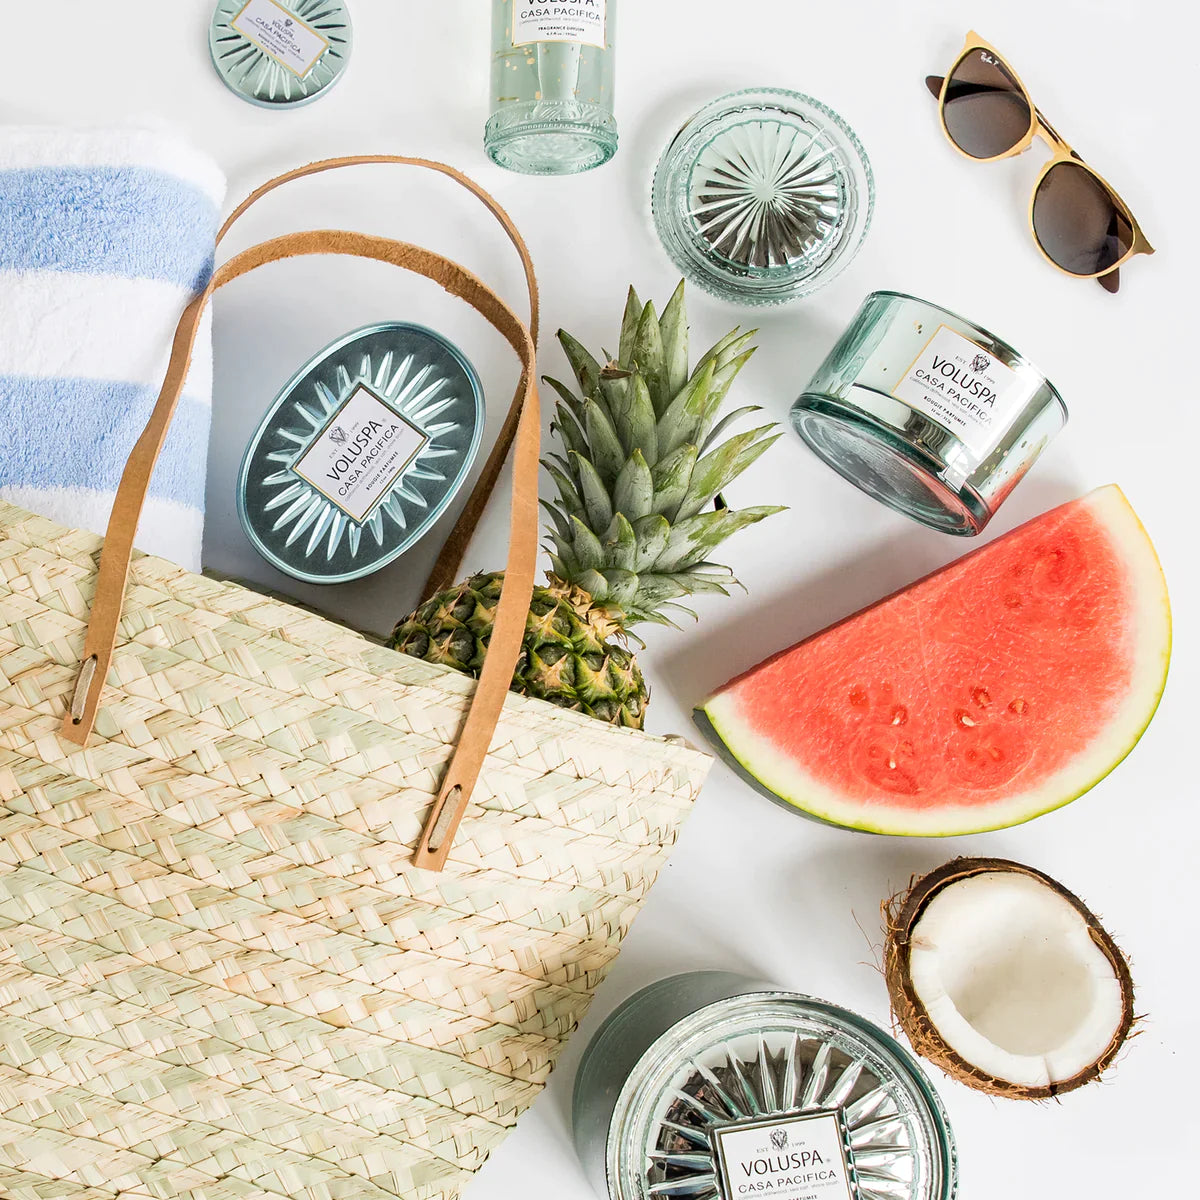 woven bag with pineapple, watermelon, towel surrounded by Casa Pacifica collection.